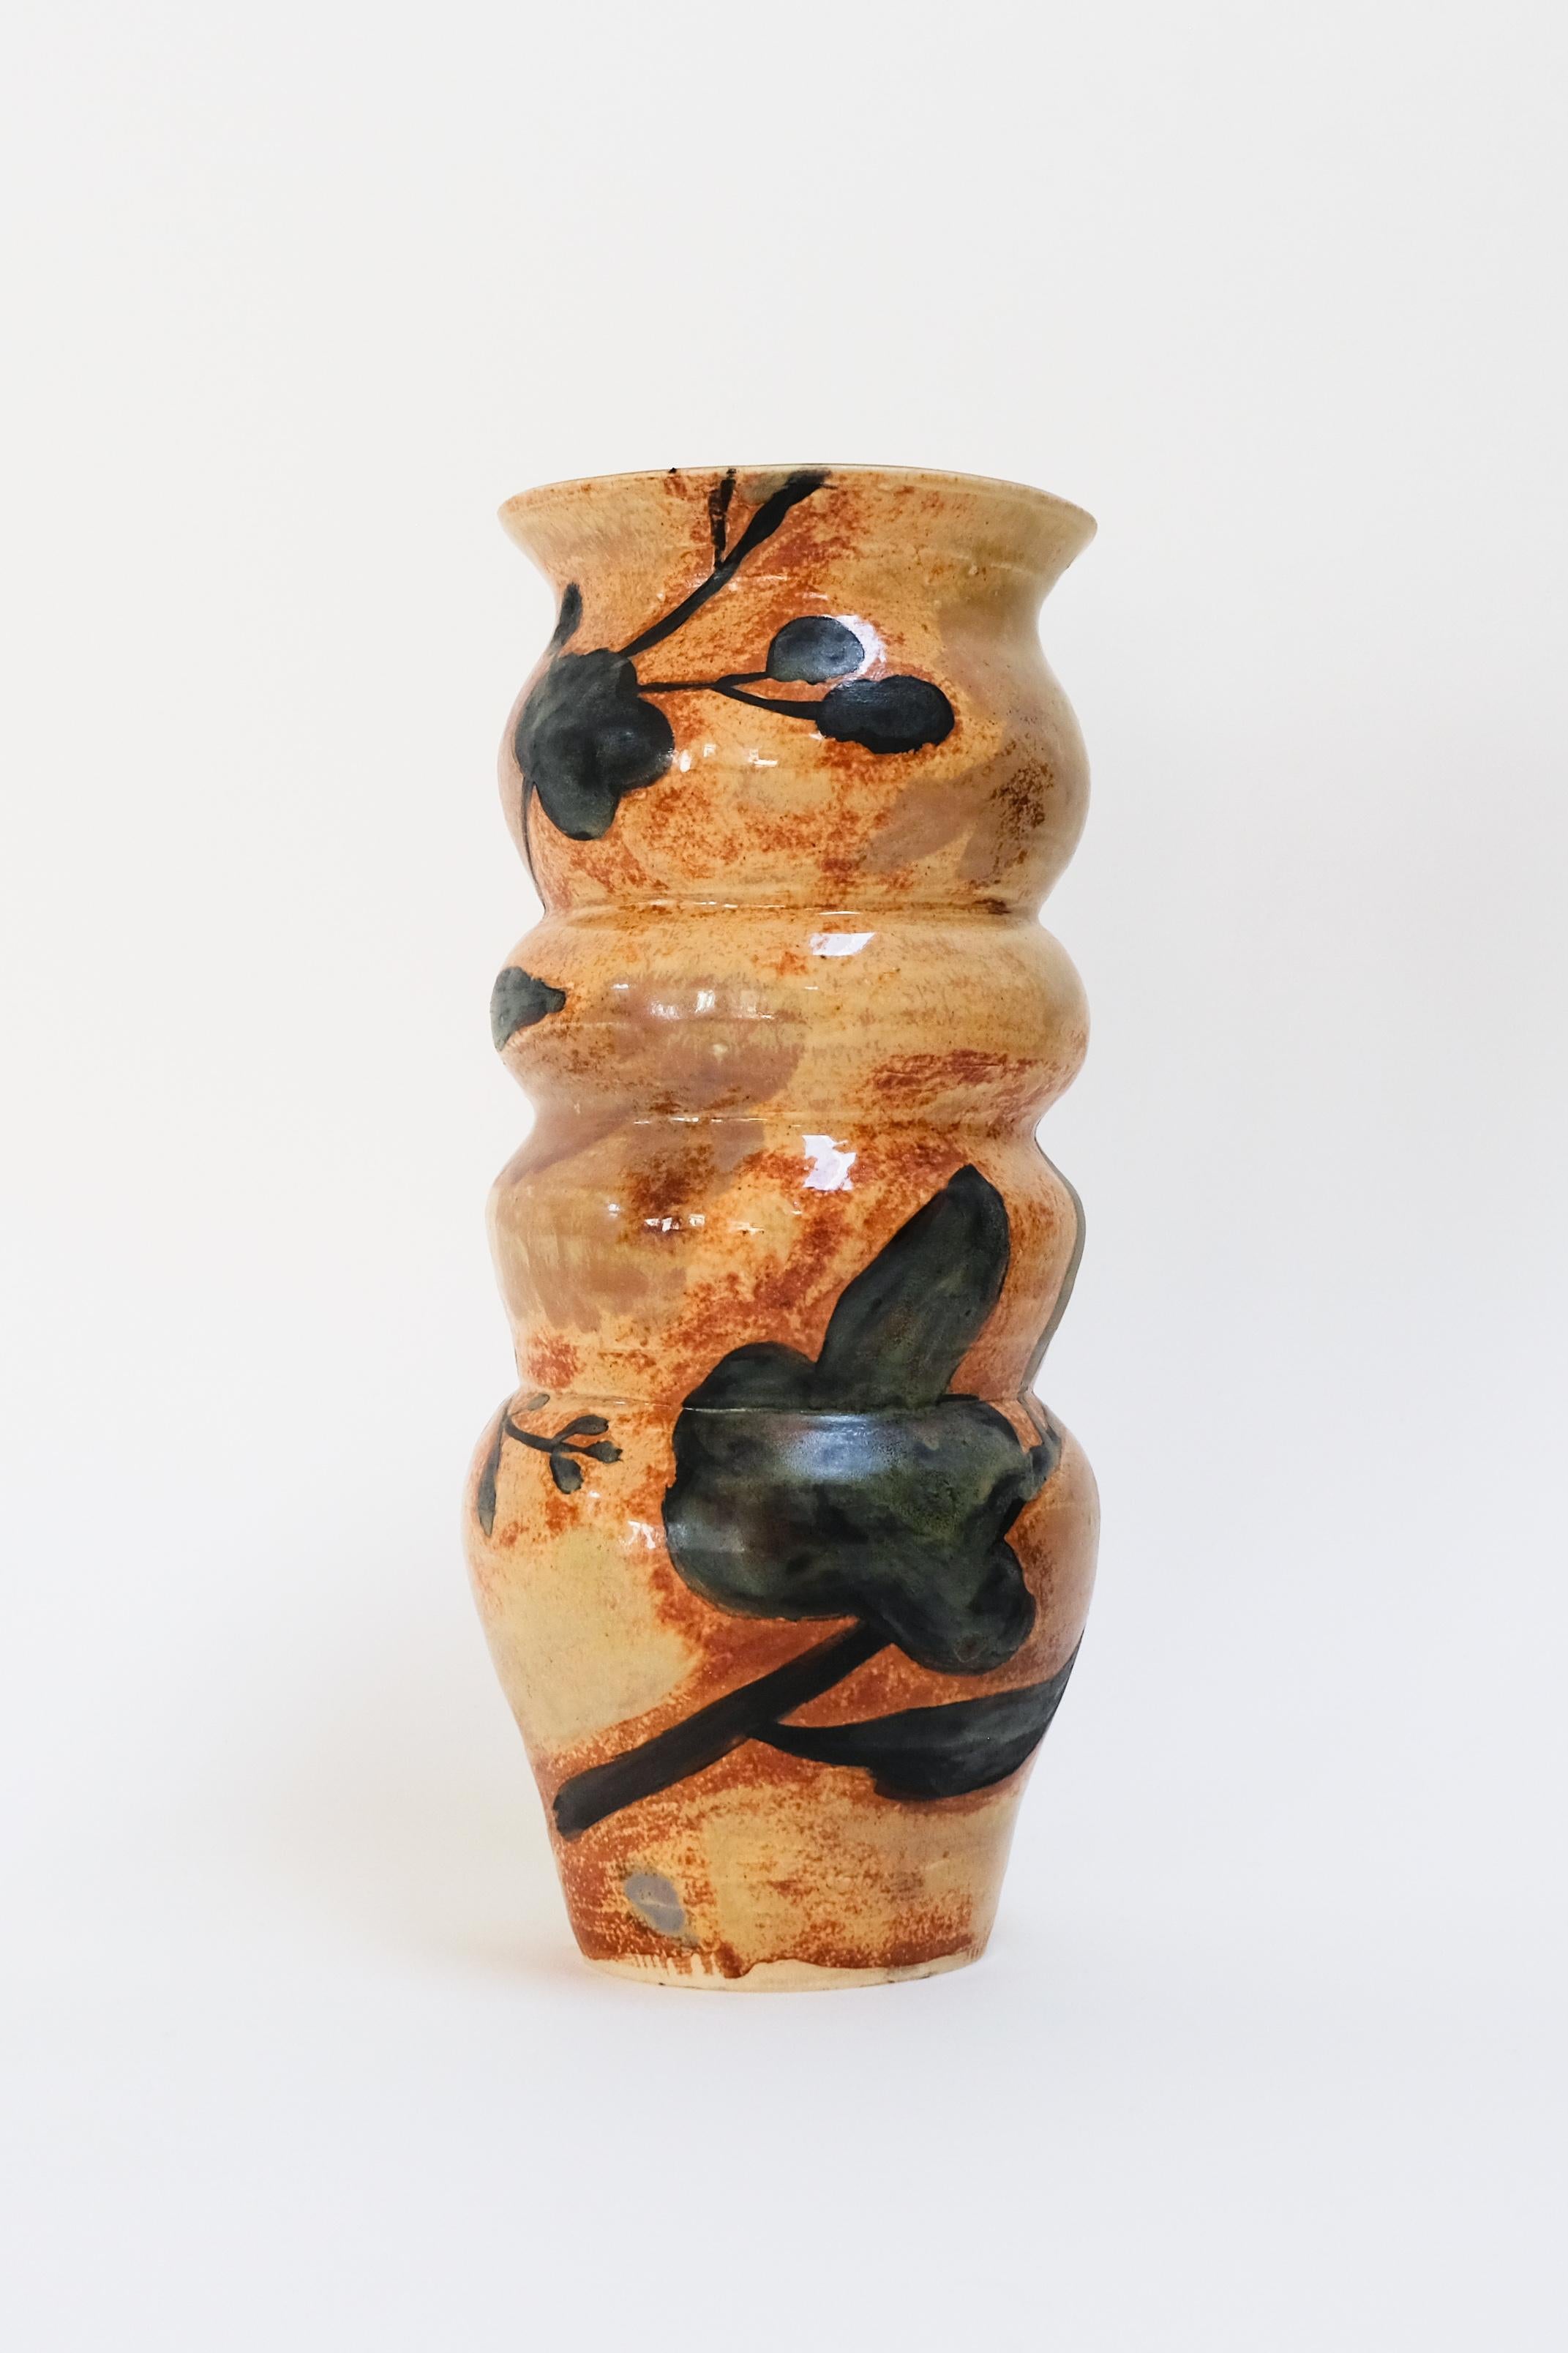 Searching for Berries - contemporary warm botanical ceramic vase, functional - Contemporary Sculpture by Misbah Ahmed